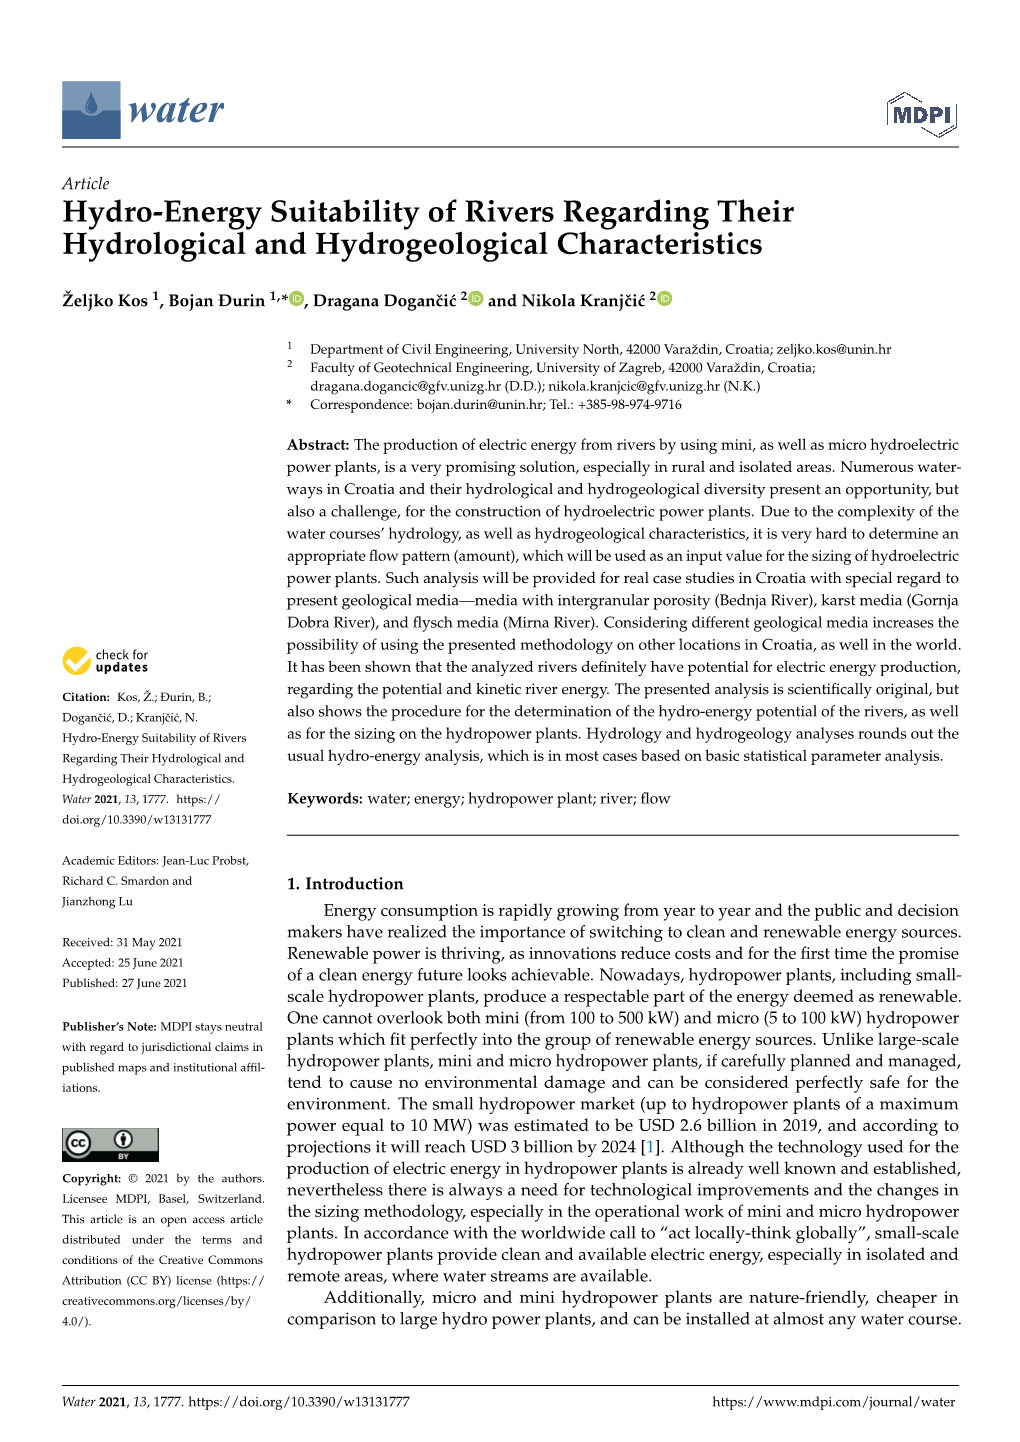 Hydro-Energy Suitability of Rivers Regarding Their Hydrological and Hydrogeological Characteristics